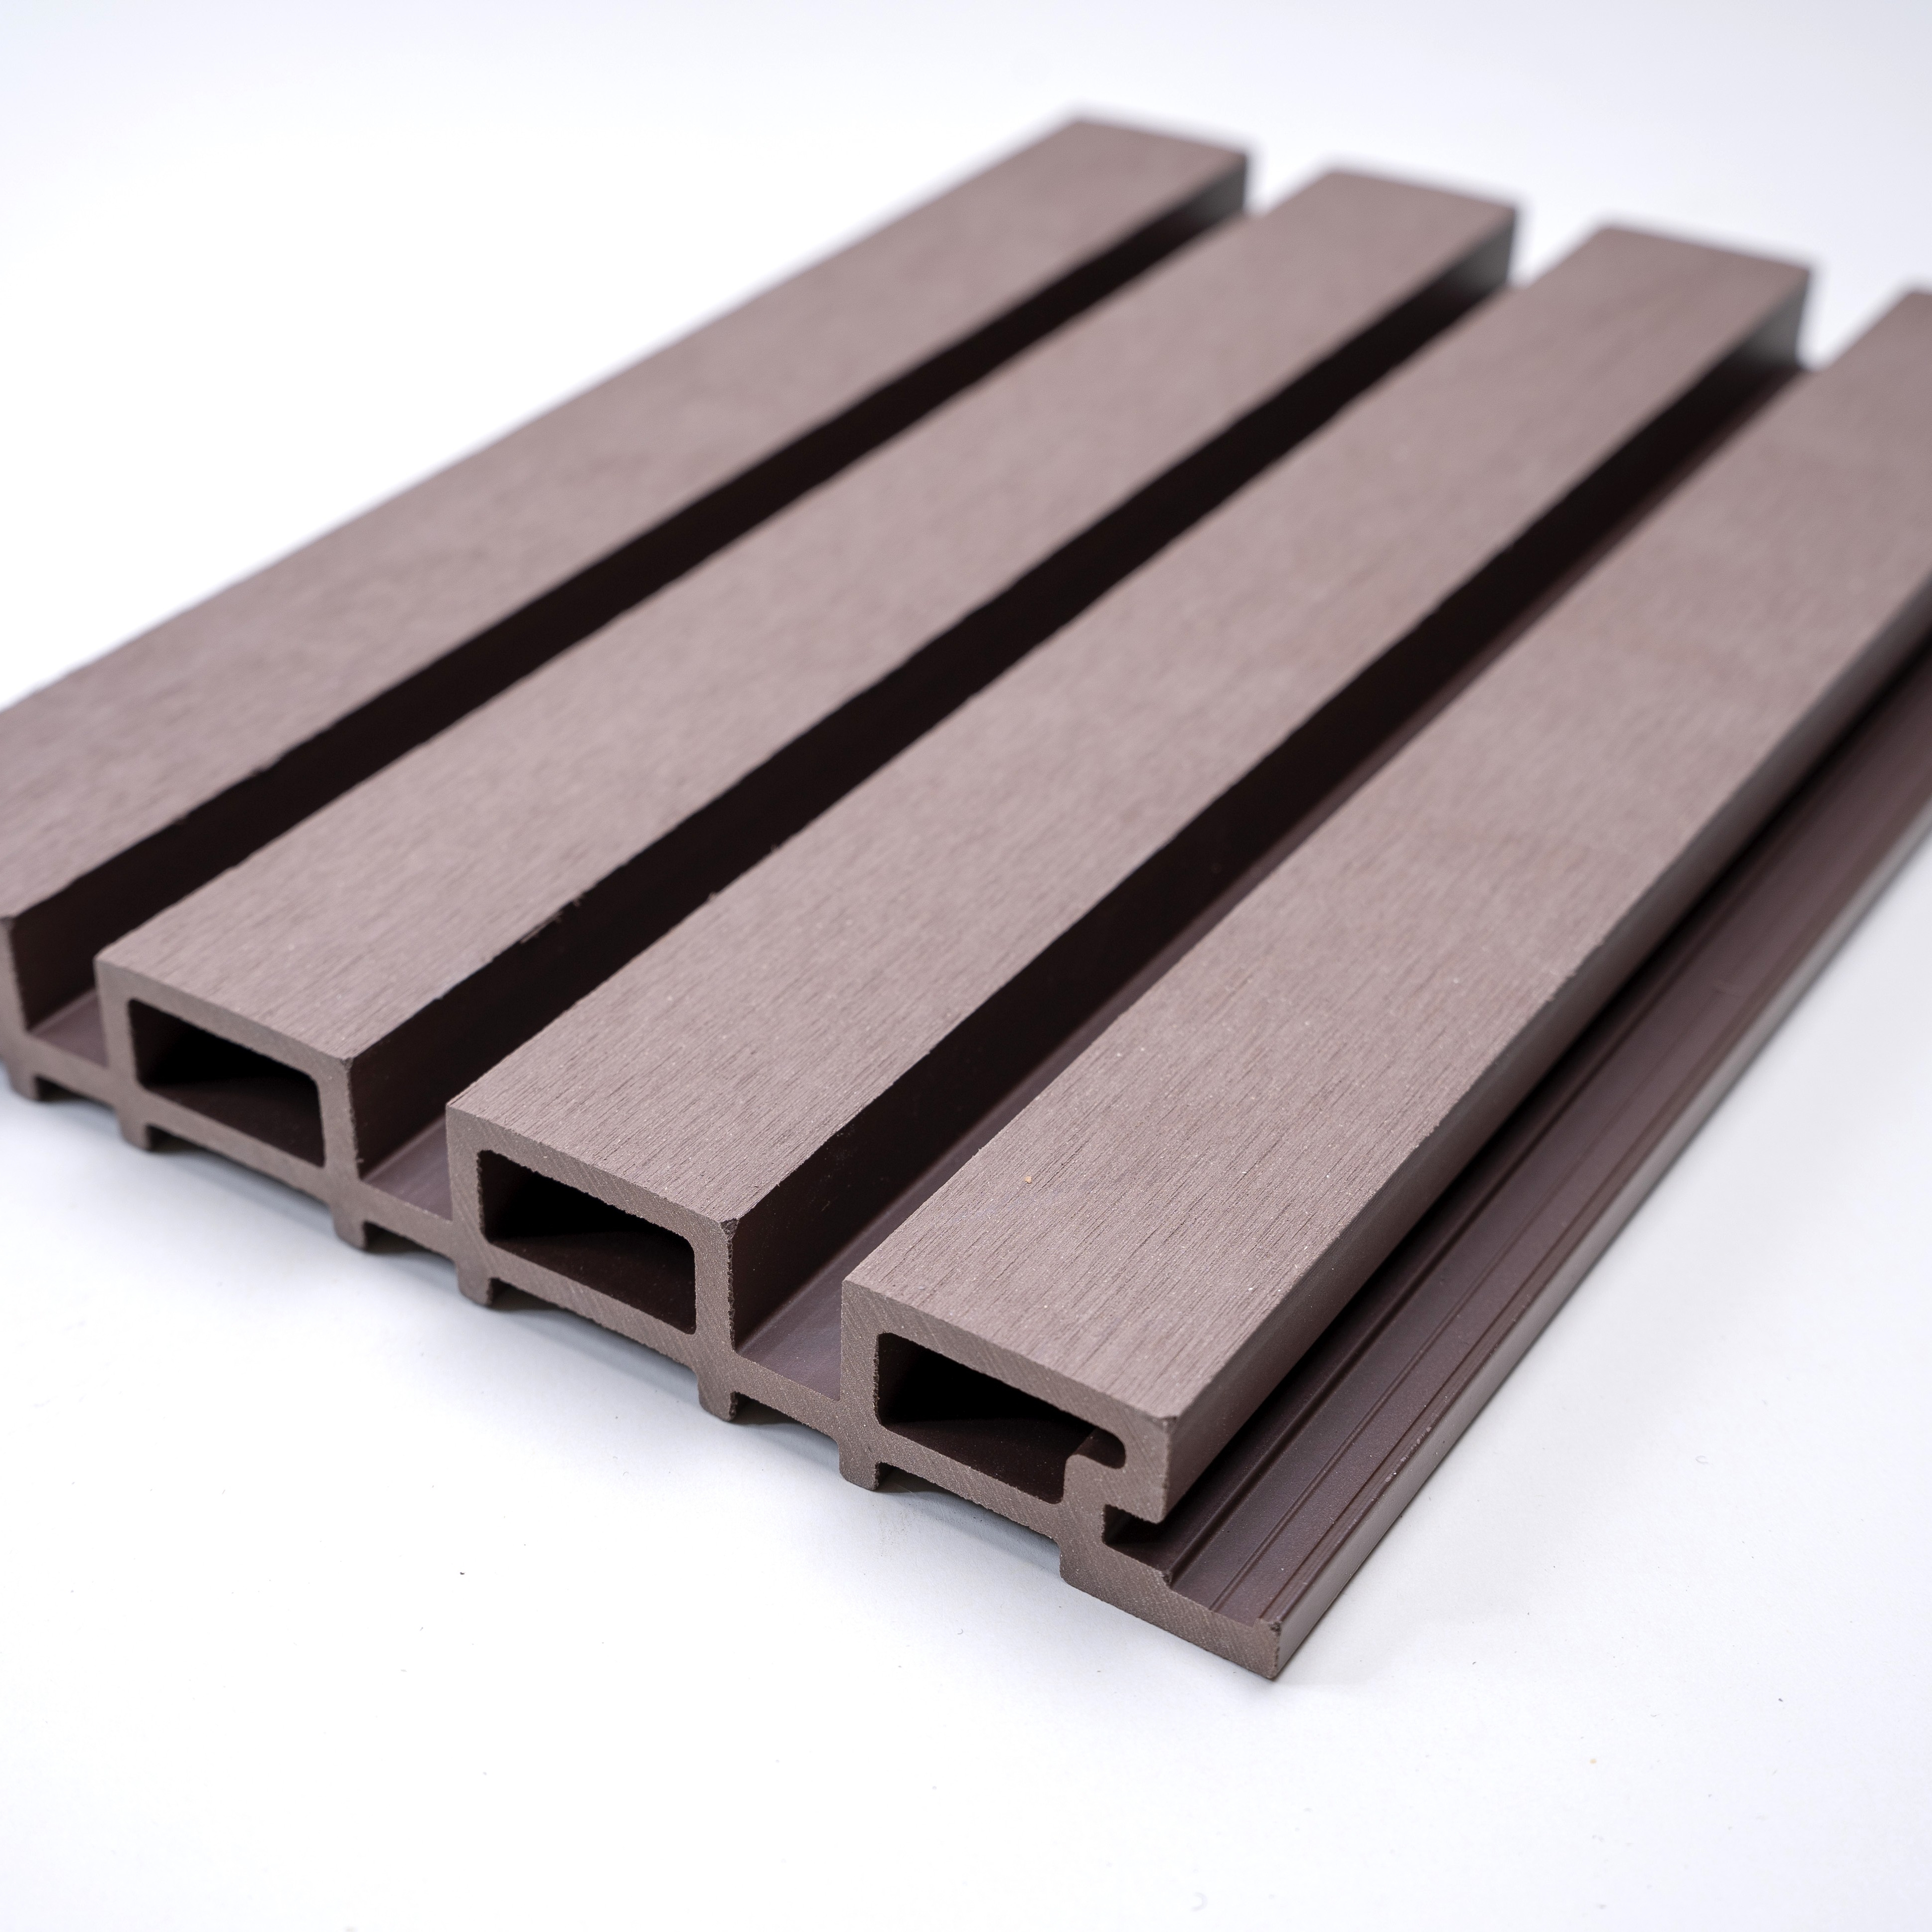 China Wholesale PVC Wood Plastic Composite Exterior Wall Cladding 3D Fluted Wood Wall Panels